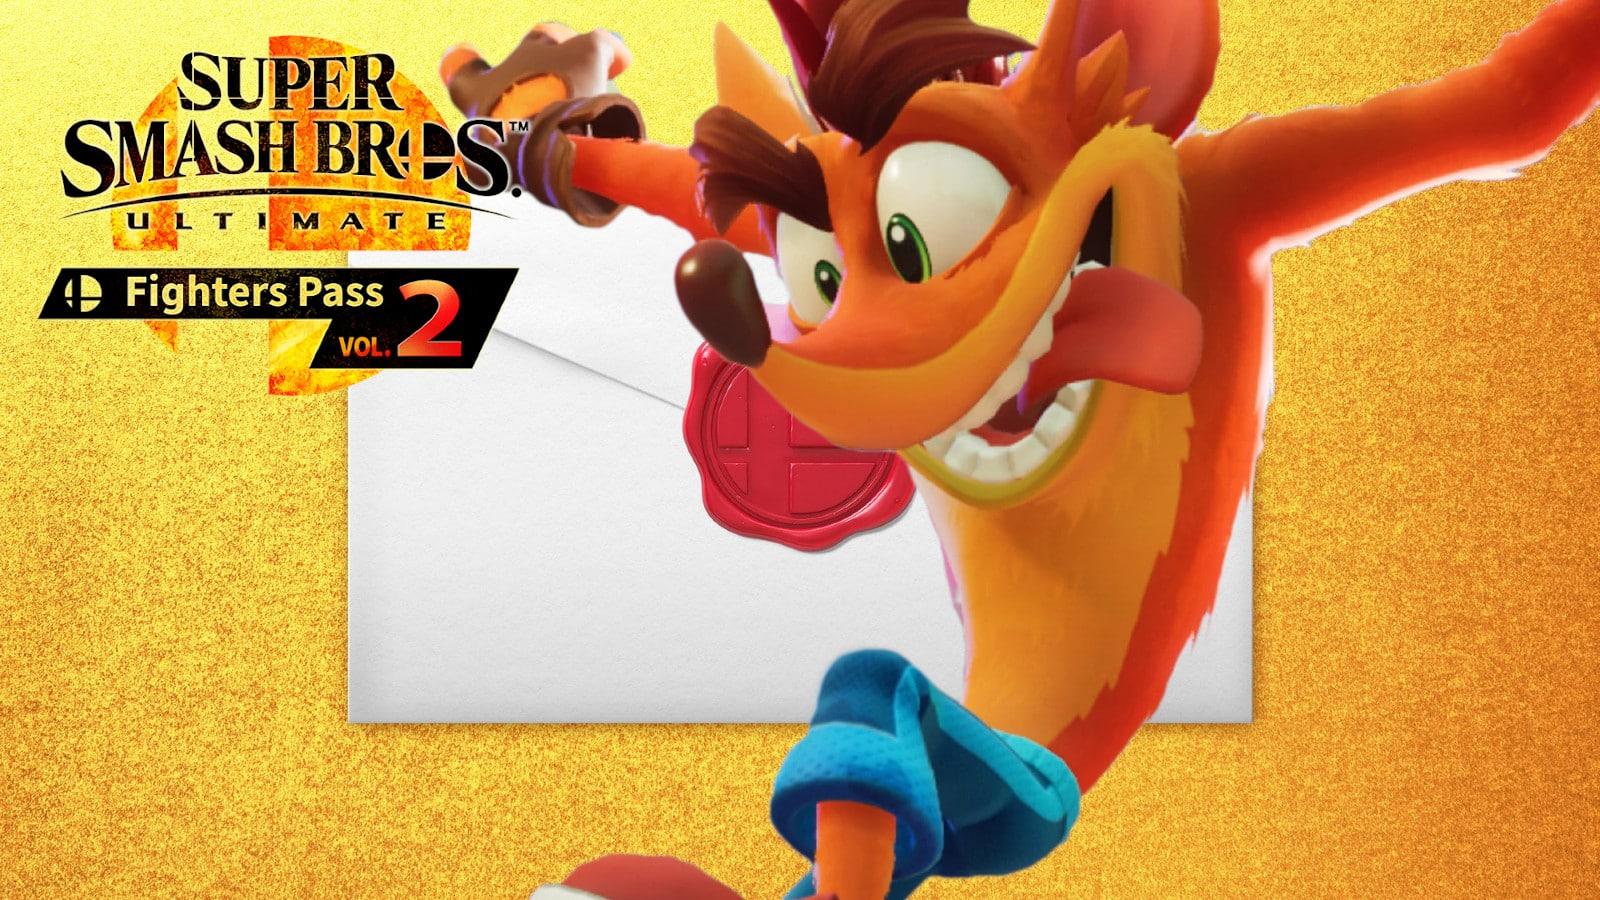 Rumors continue to support Crash Bandicoot coming to Smash